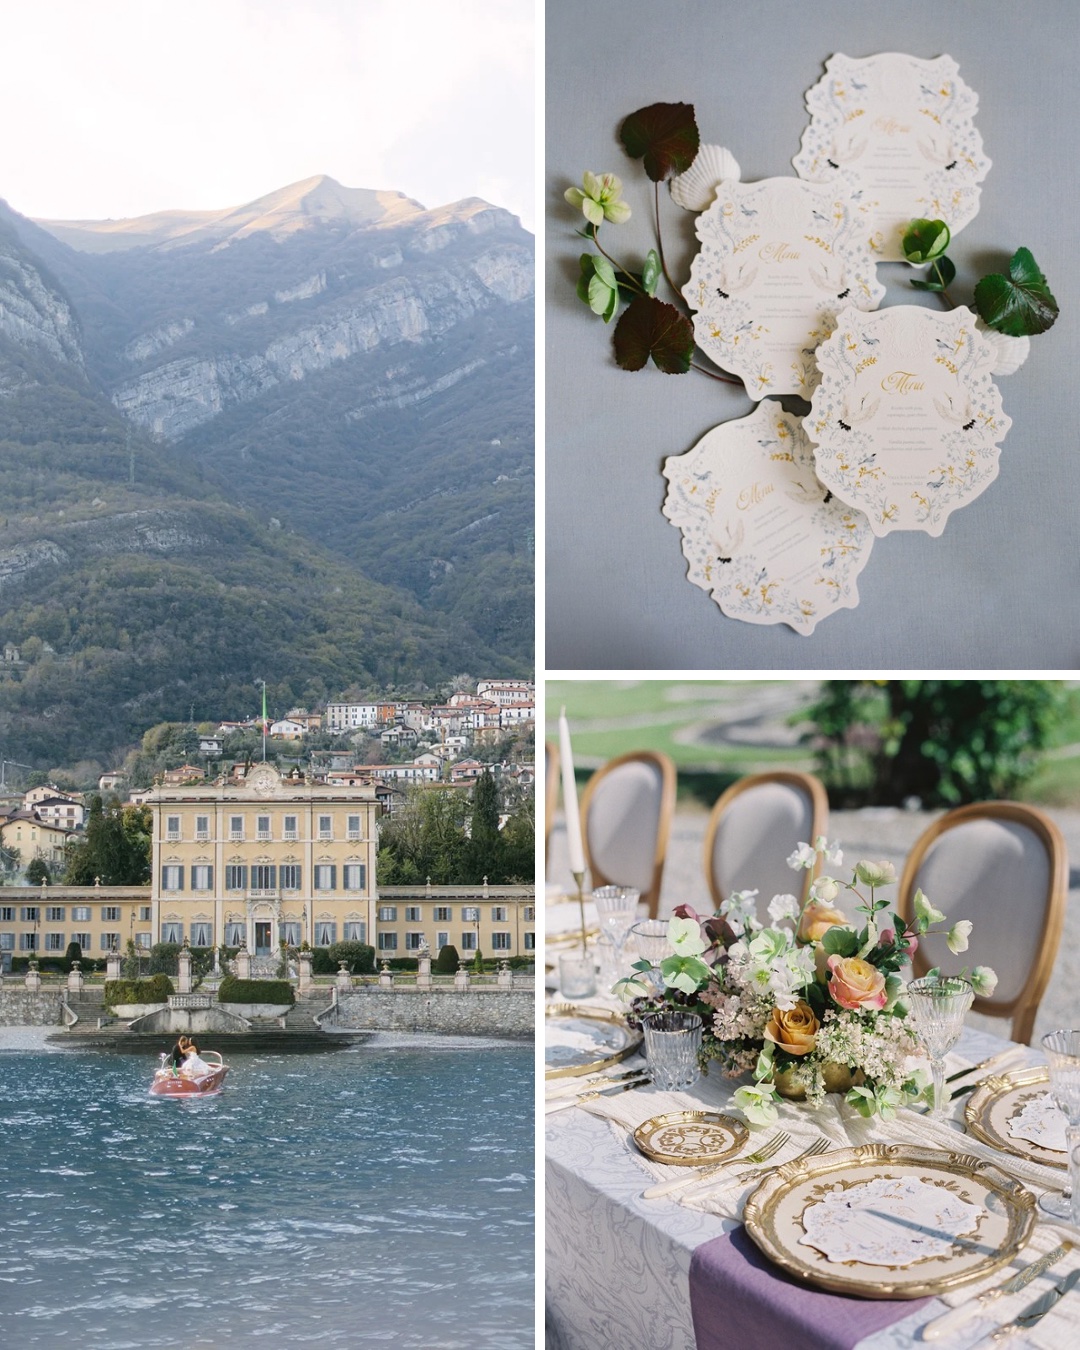 Collage of photos of a wedding reception set up and an Italian villa